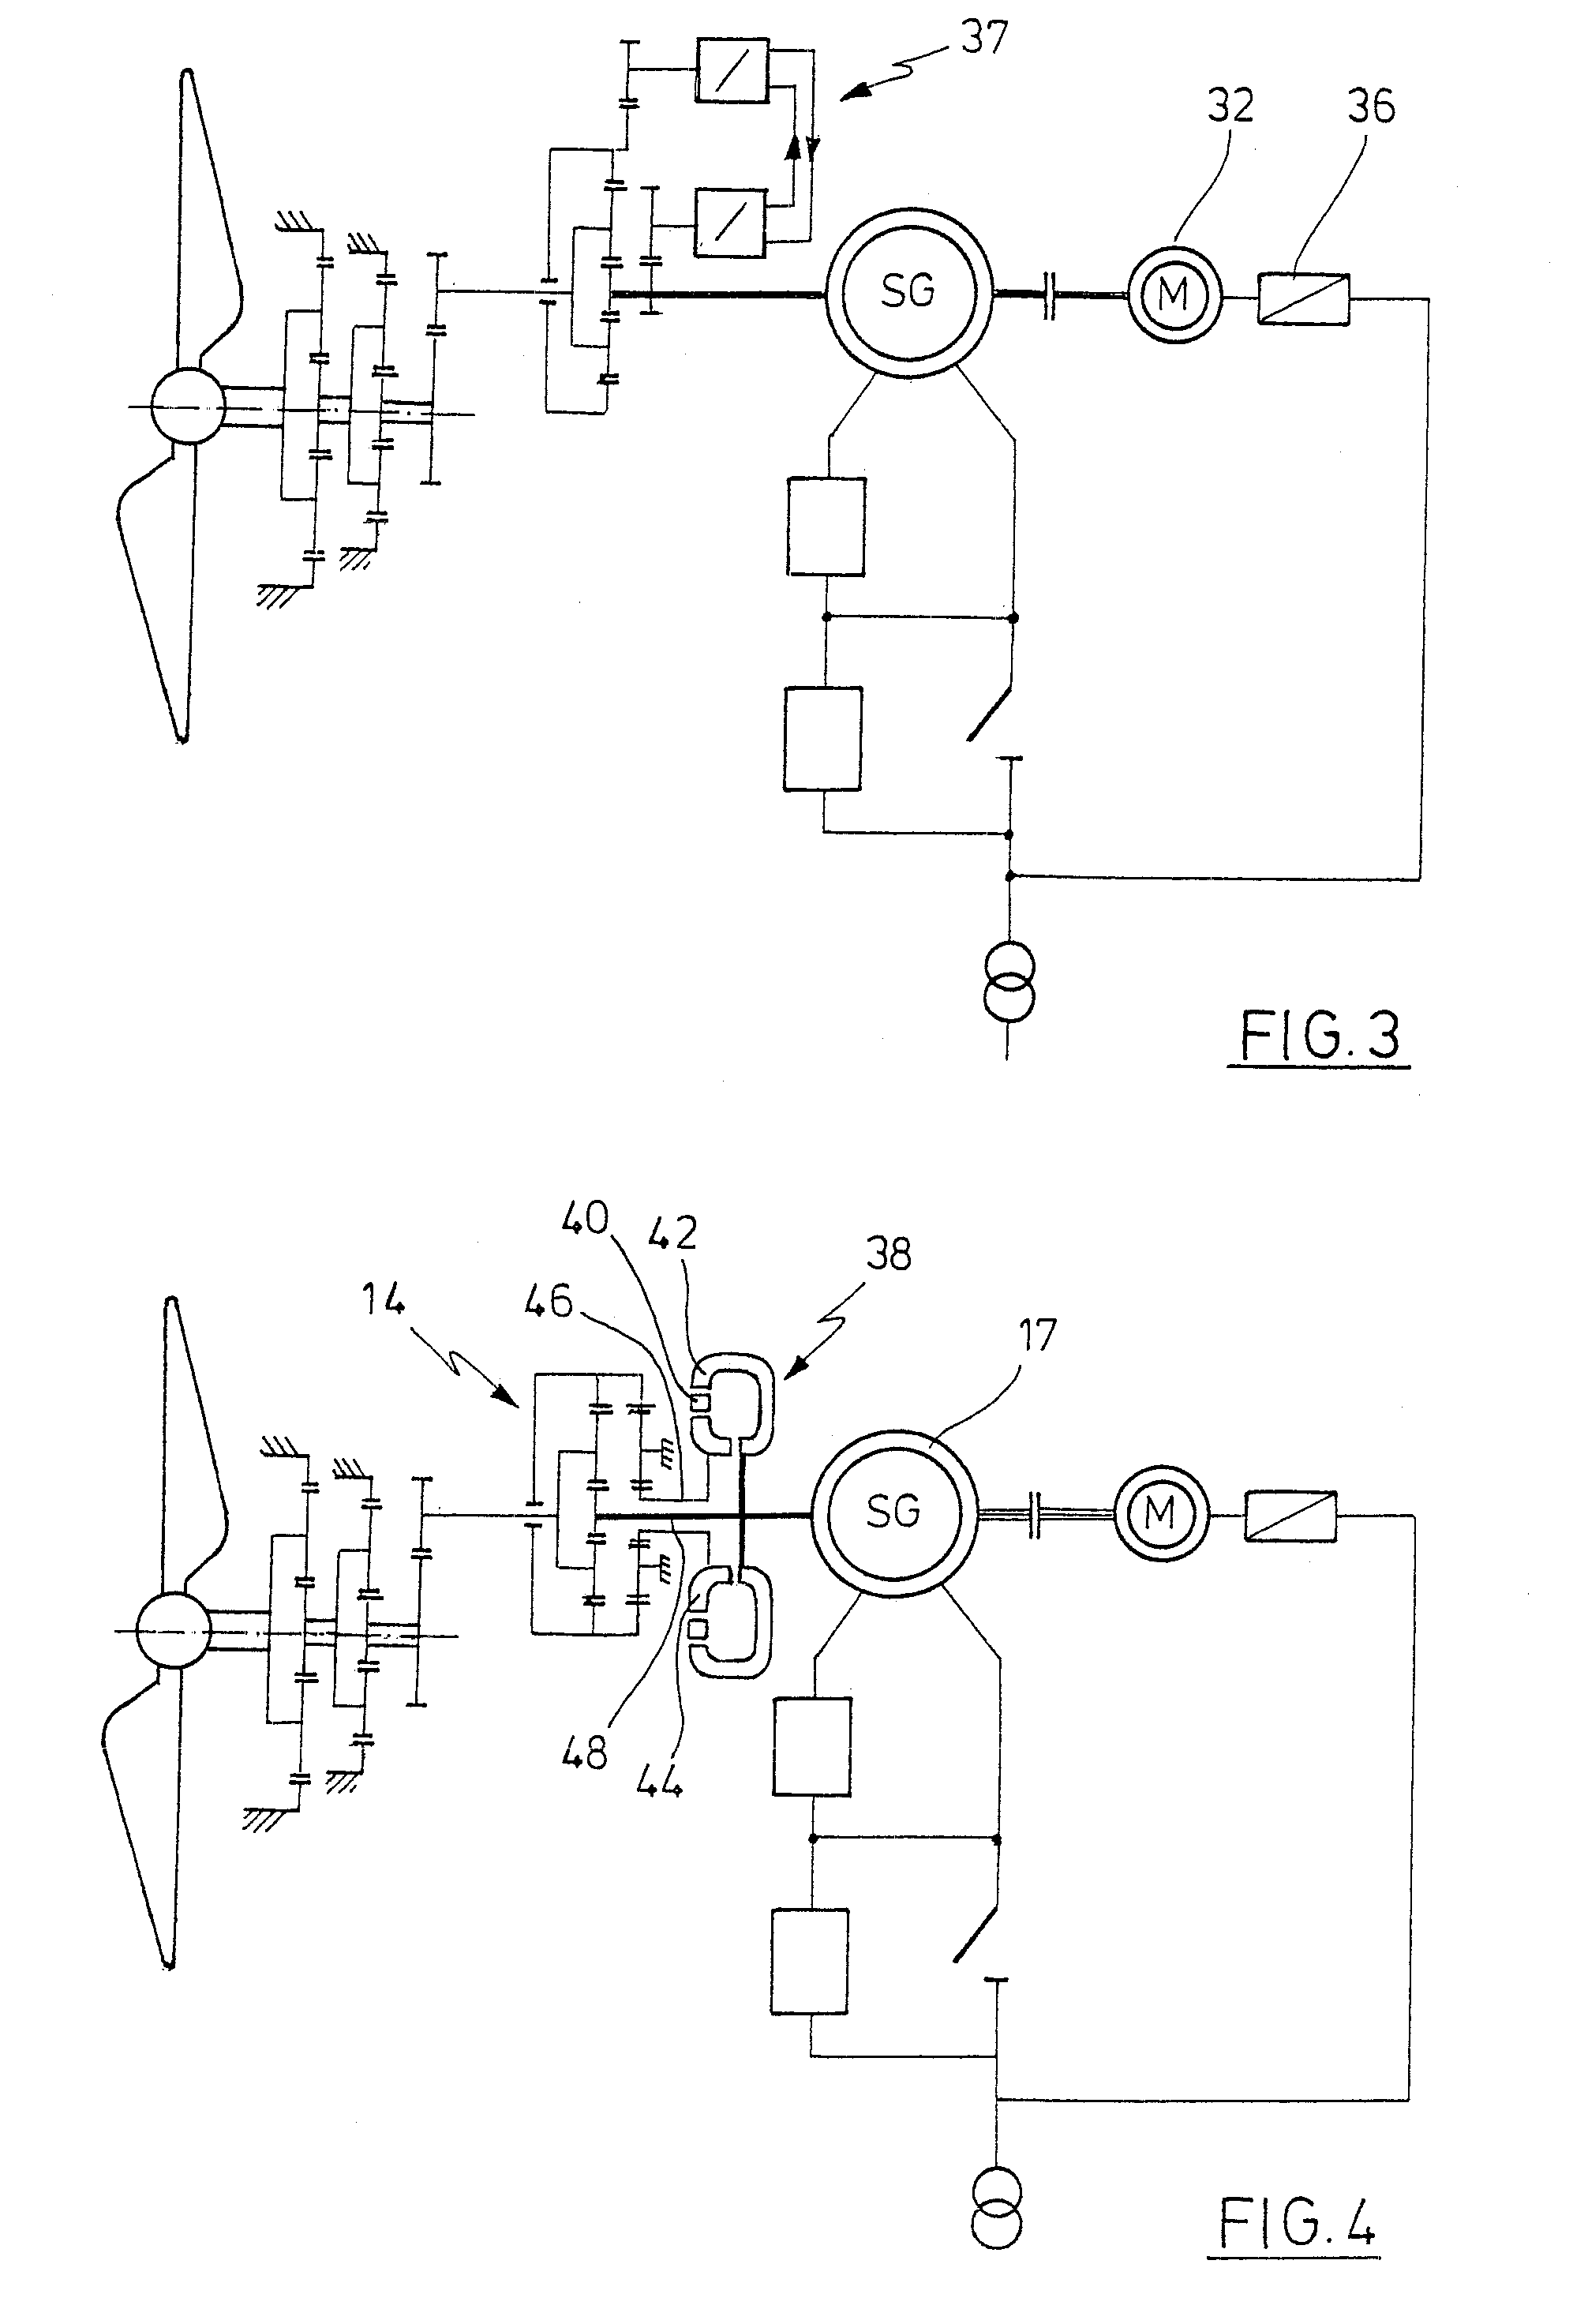 Method for the operation of a wind energy plant with a synchronous generator and a superimposition gearbox